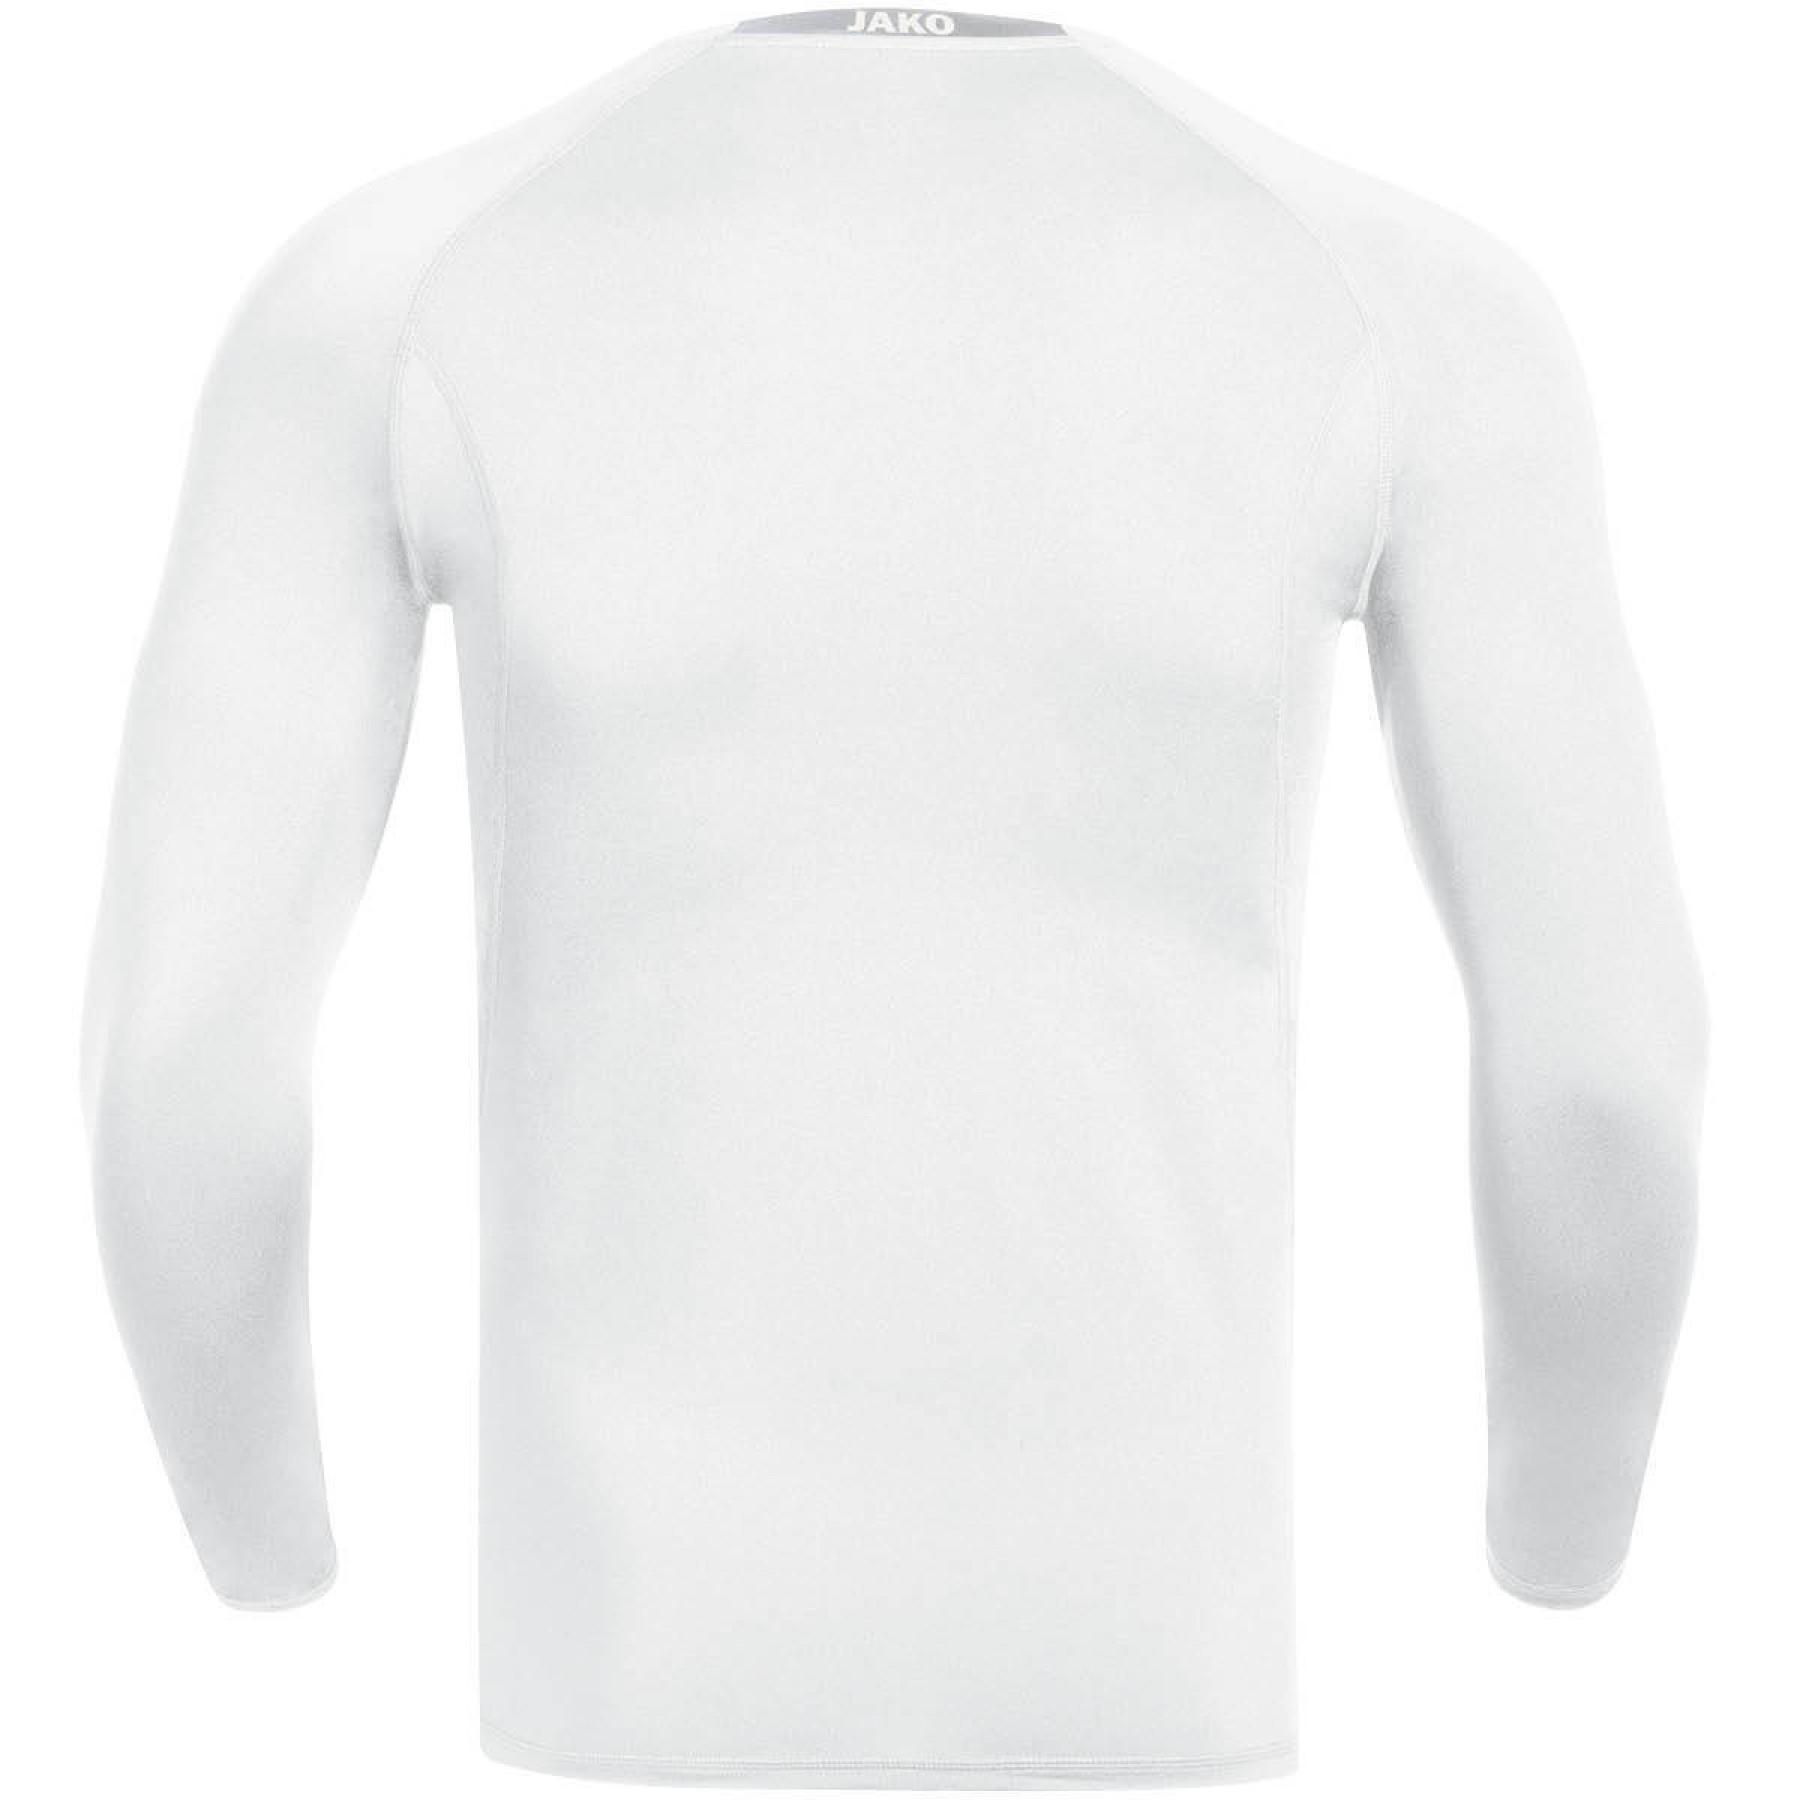 Jersey Jako Compression 2.0 manches longues